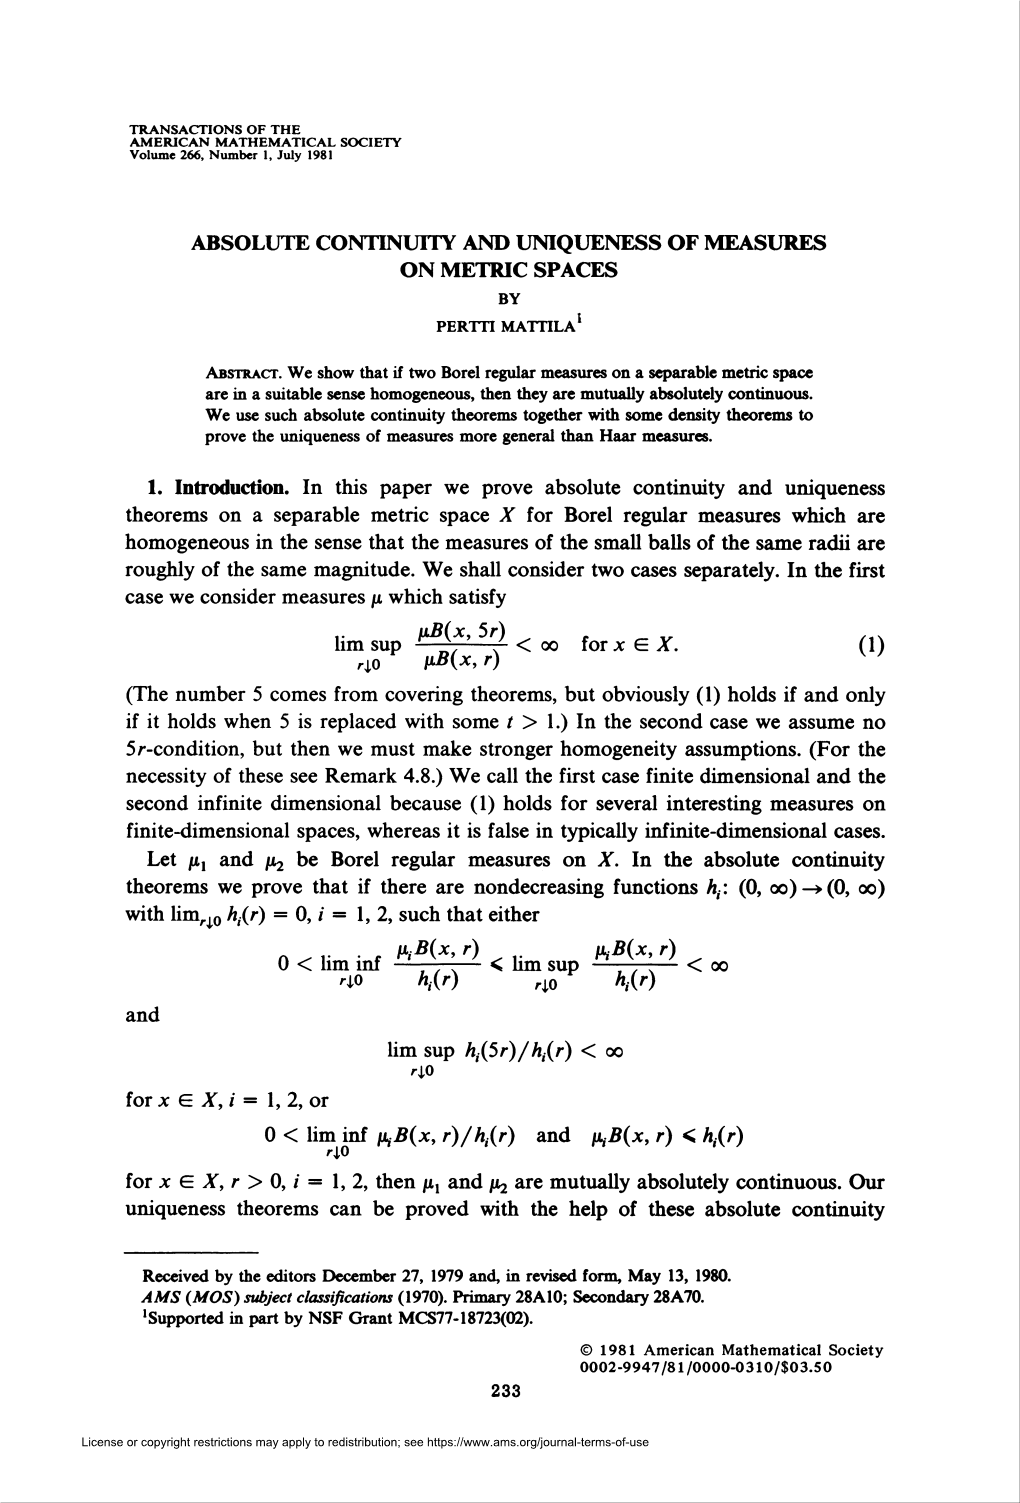 Absolute Continuity and Uniqueness of Measures on Metric Spaces by 1 Pertti Mattila